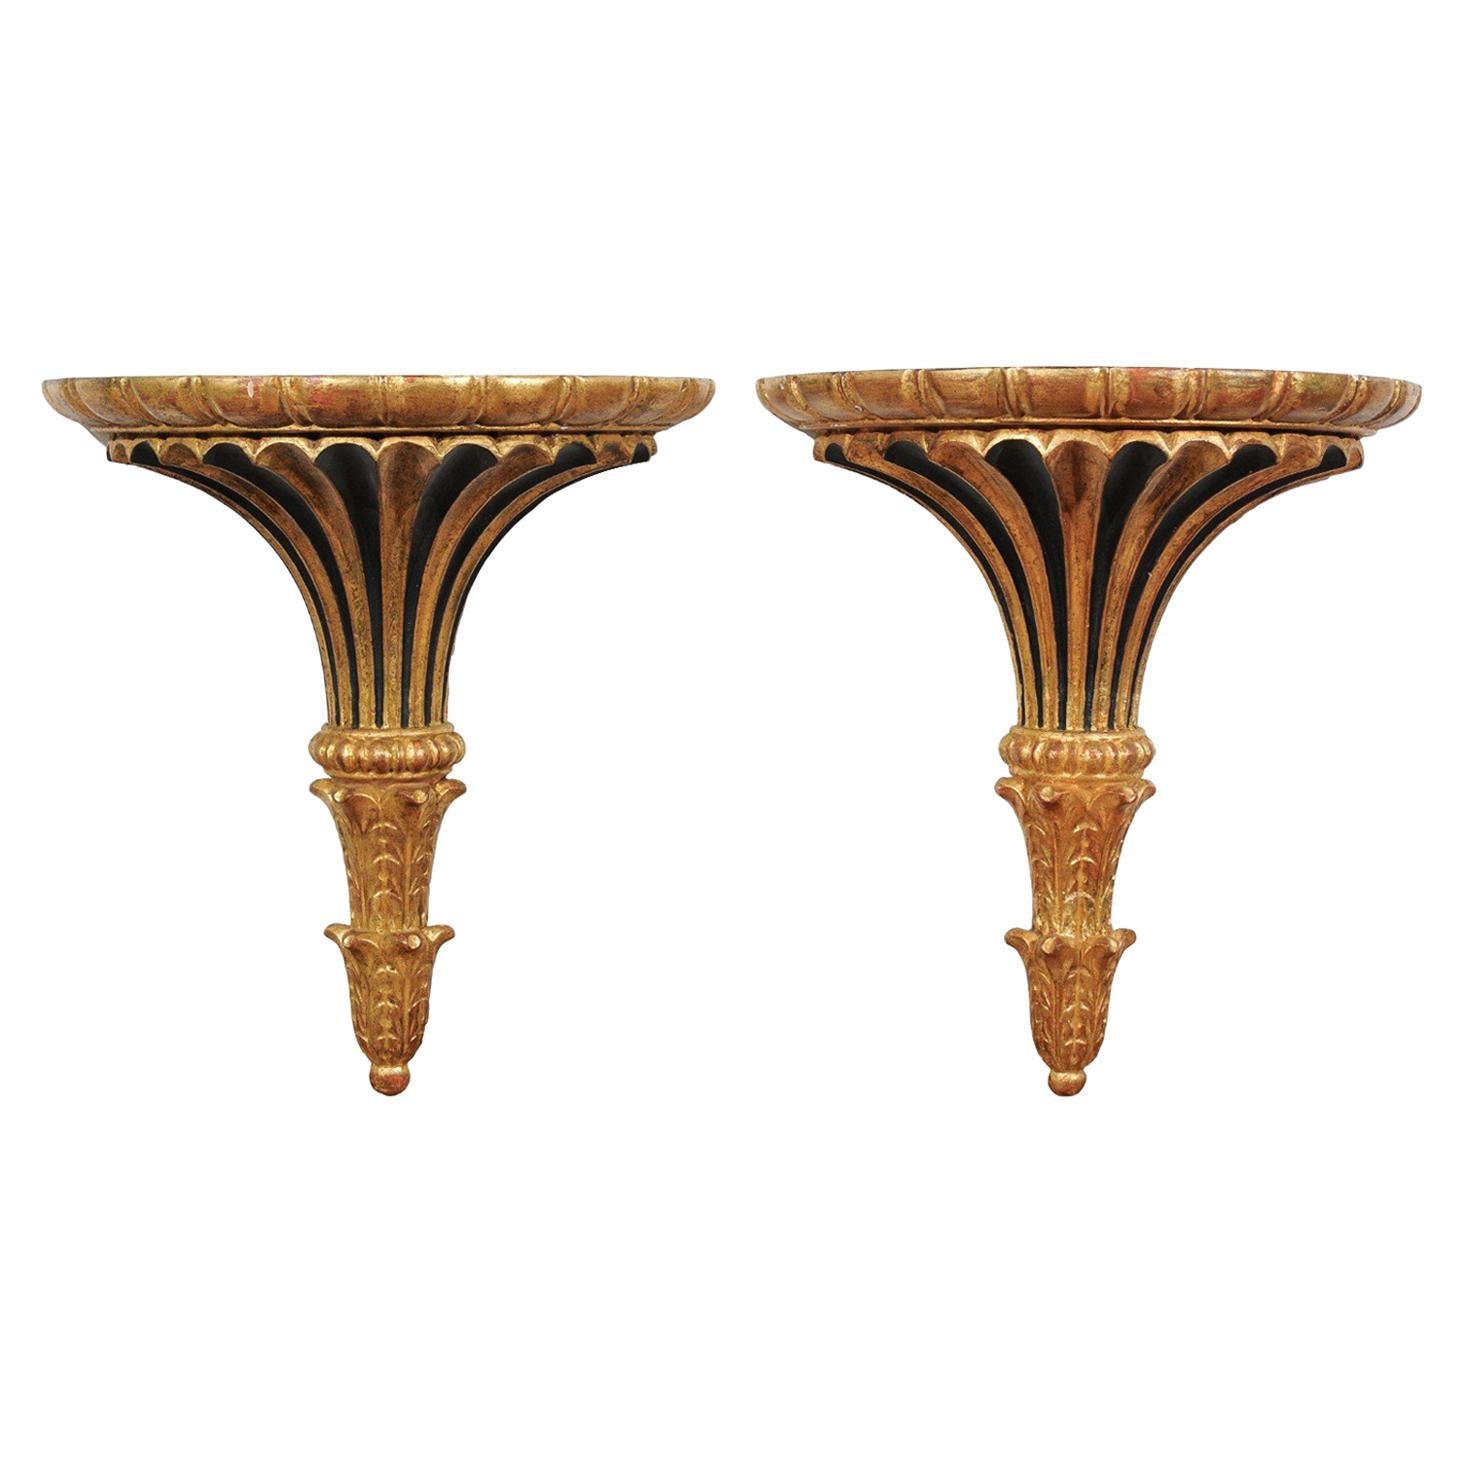 Pair of Italian 1870s Carved Wall Brackets with Gold and Black Painted Accents